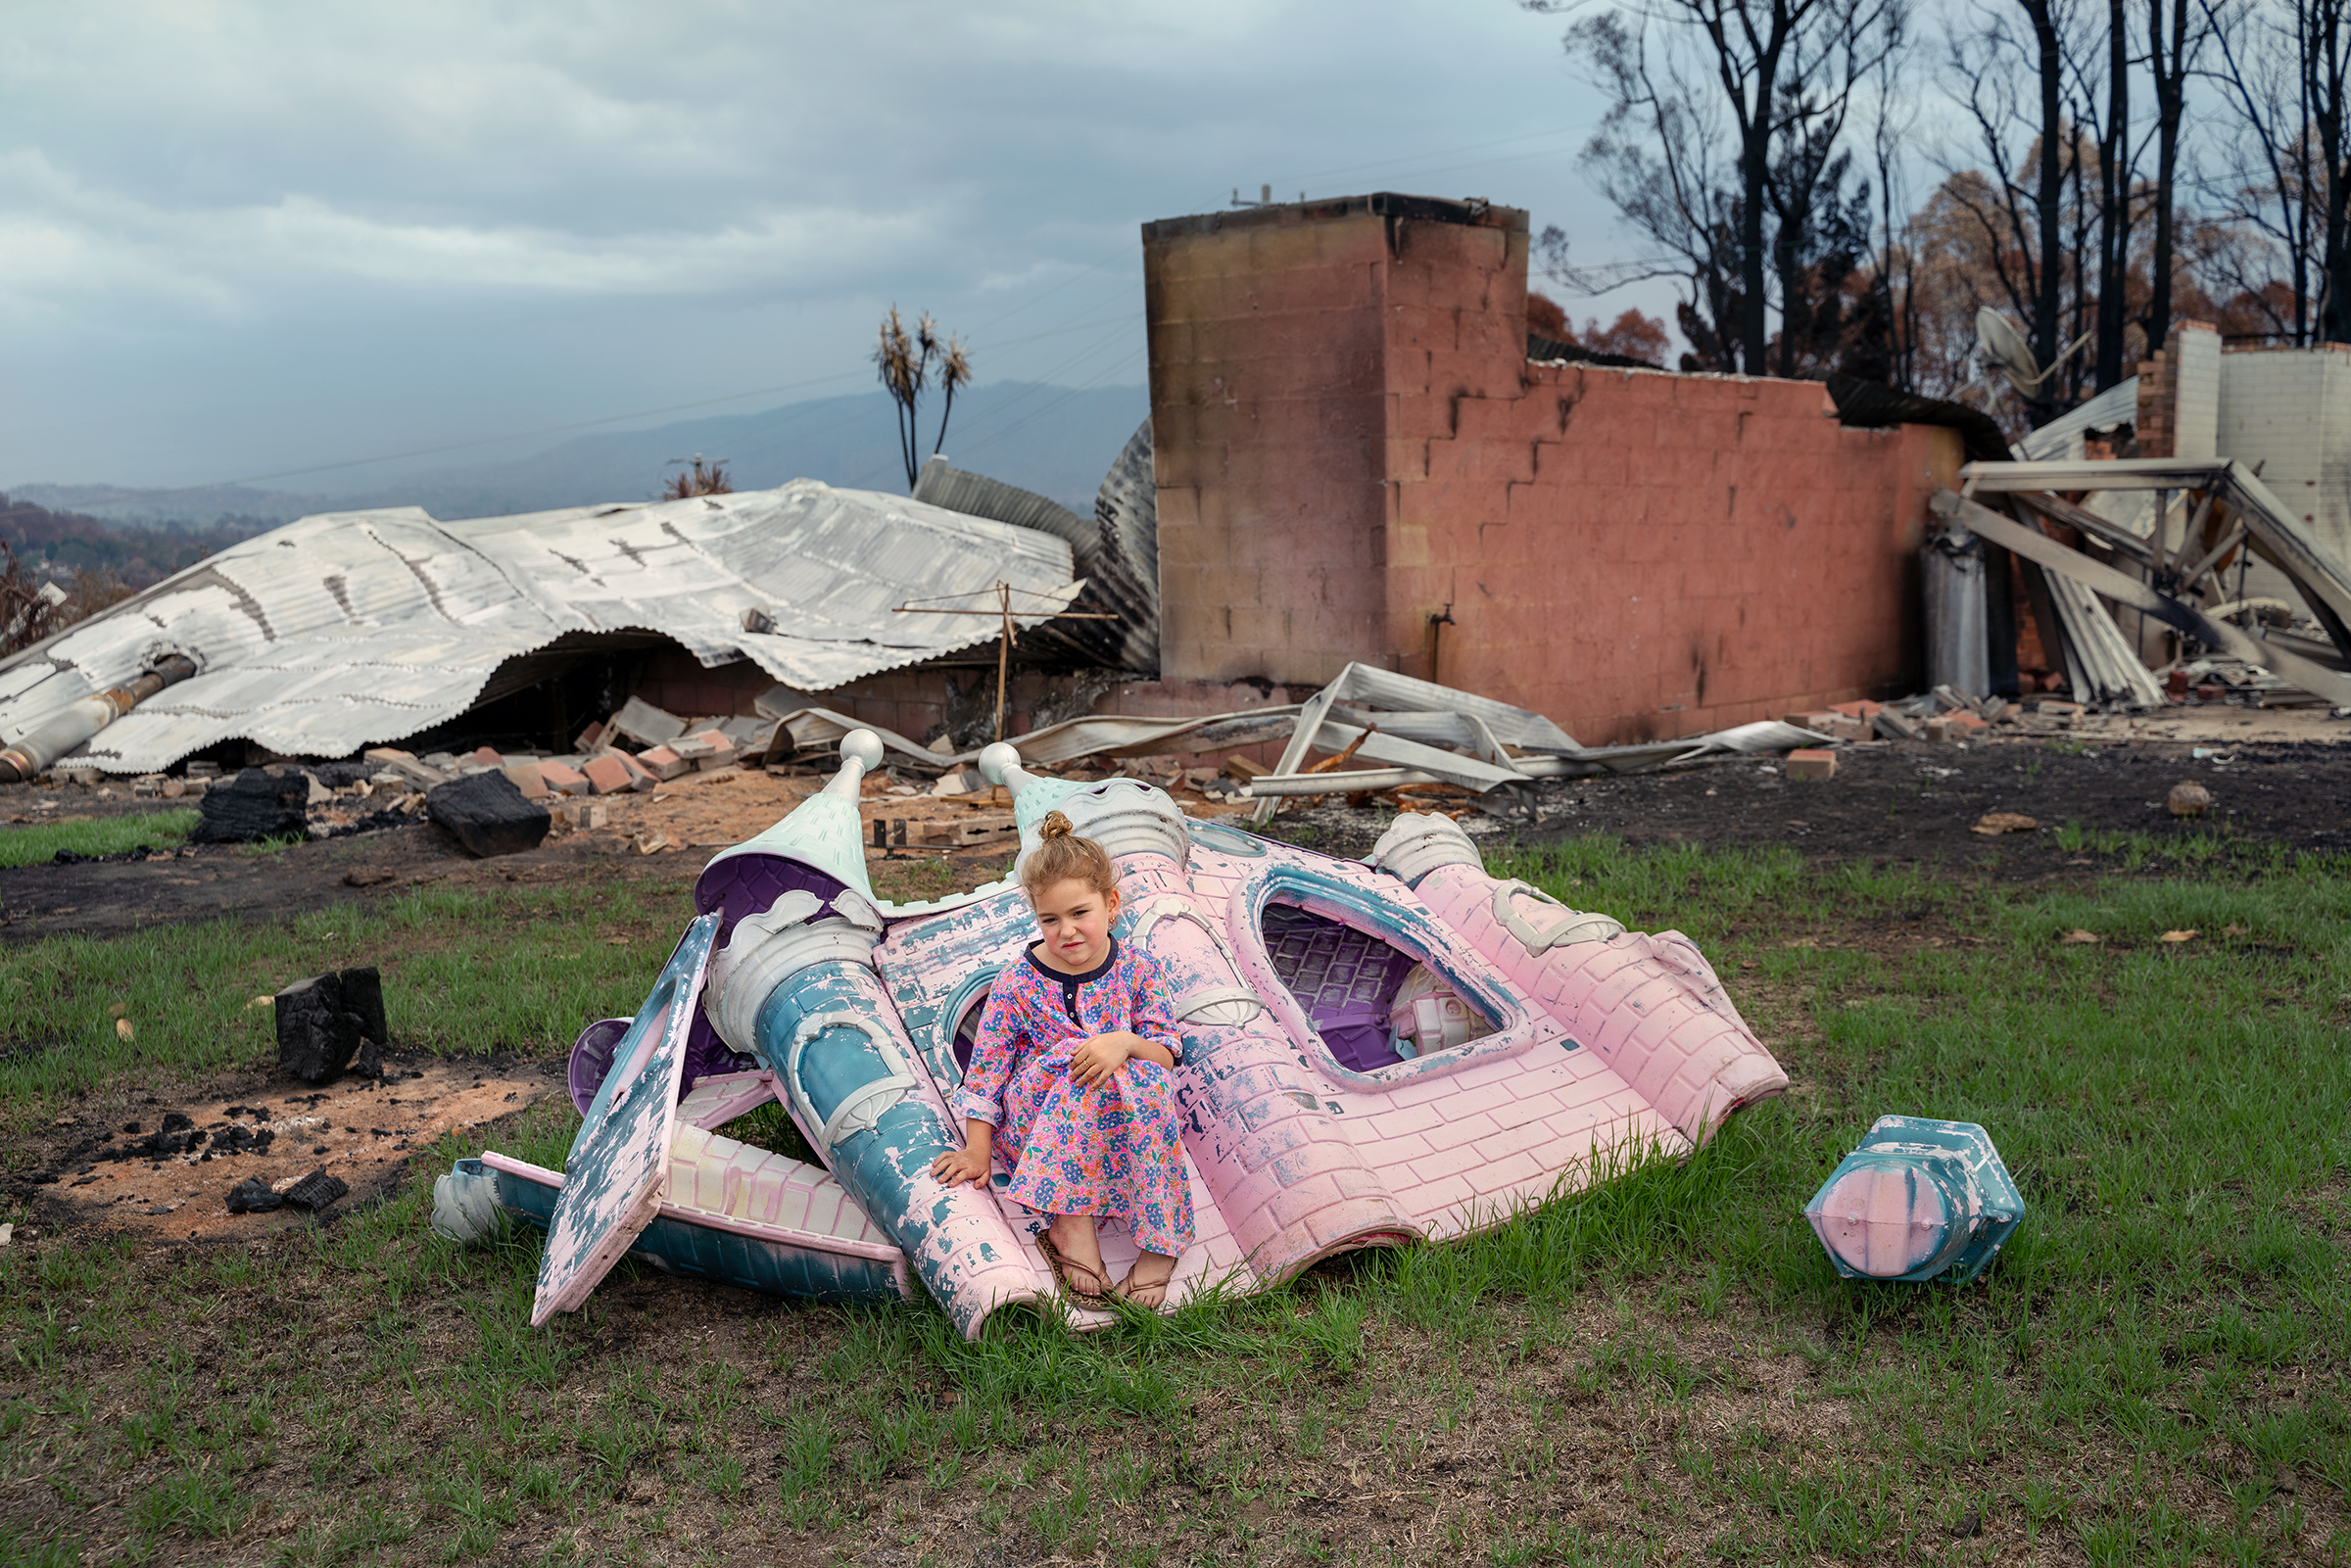 Sarah Rugendyke, 7, sits on a play castle that was burned on her family’s property in Cobargo on Jan. 20; an out-of-control bushfire devastated the tourist town about 240 miles south of Sydney on New Year’s Eve.